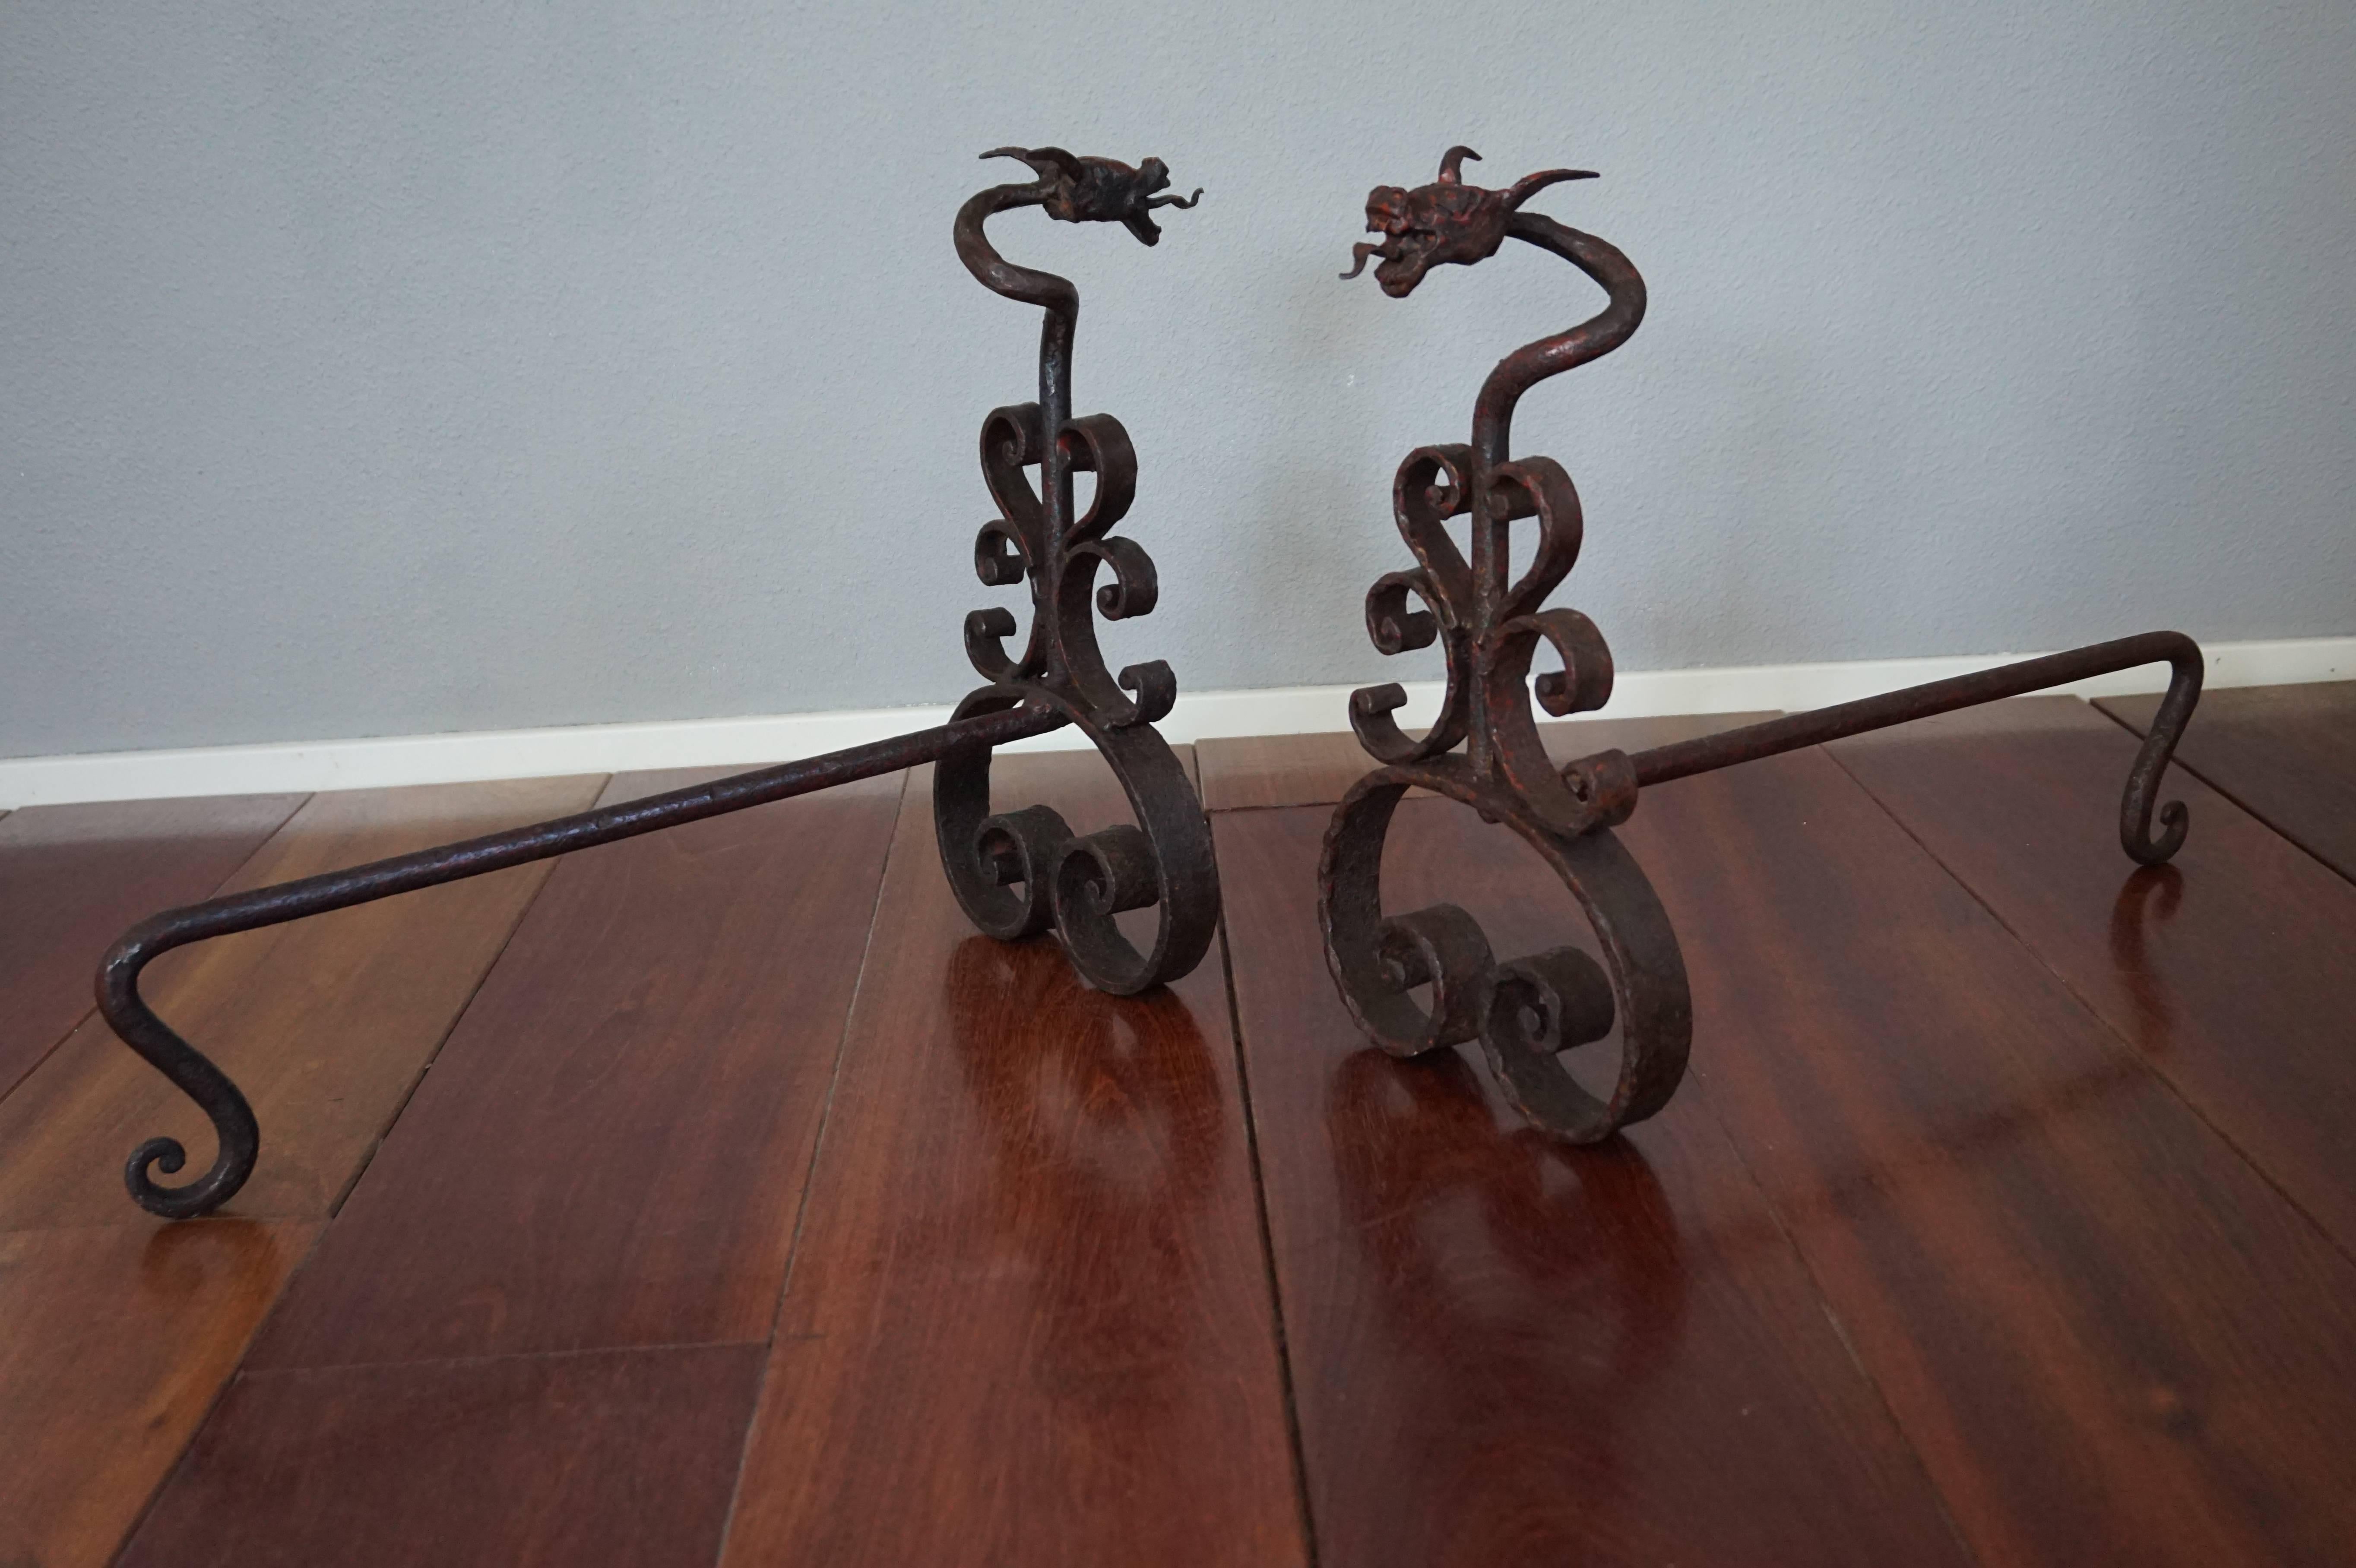 Imagine these in your fireplace with the flames burning on all sides.

These beautifully and all handcrafted wrought iron, andirons are made to stand in your fireplace as in image number one, but then straight forward. The idea is to put your loggs